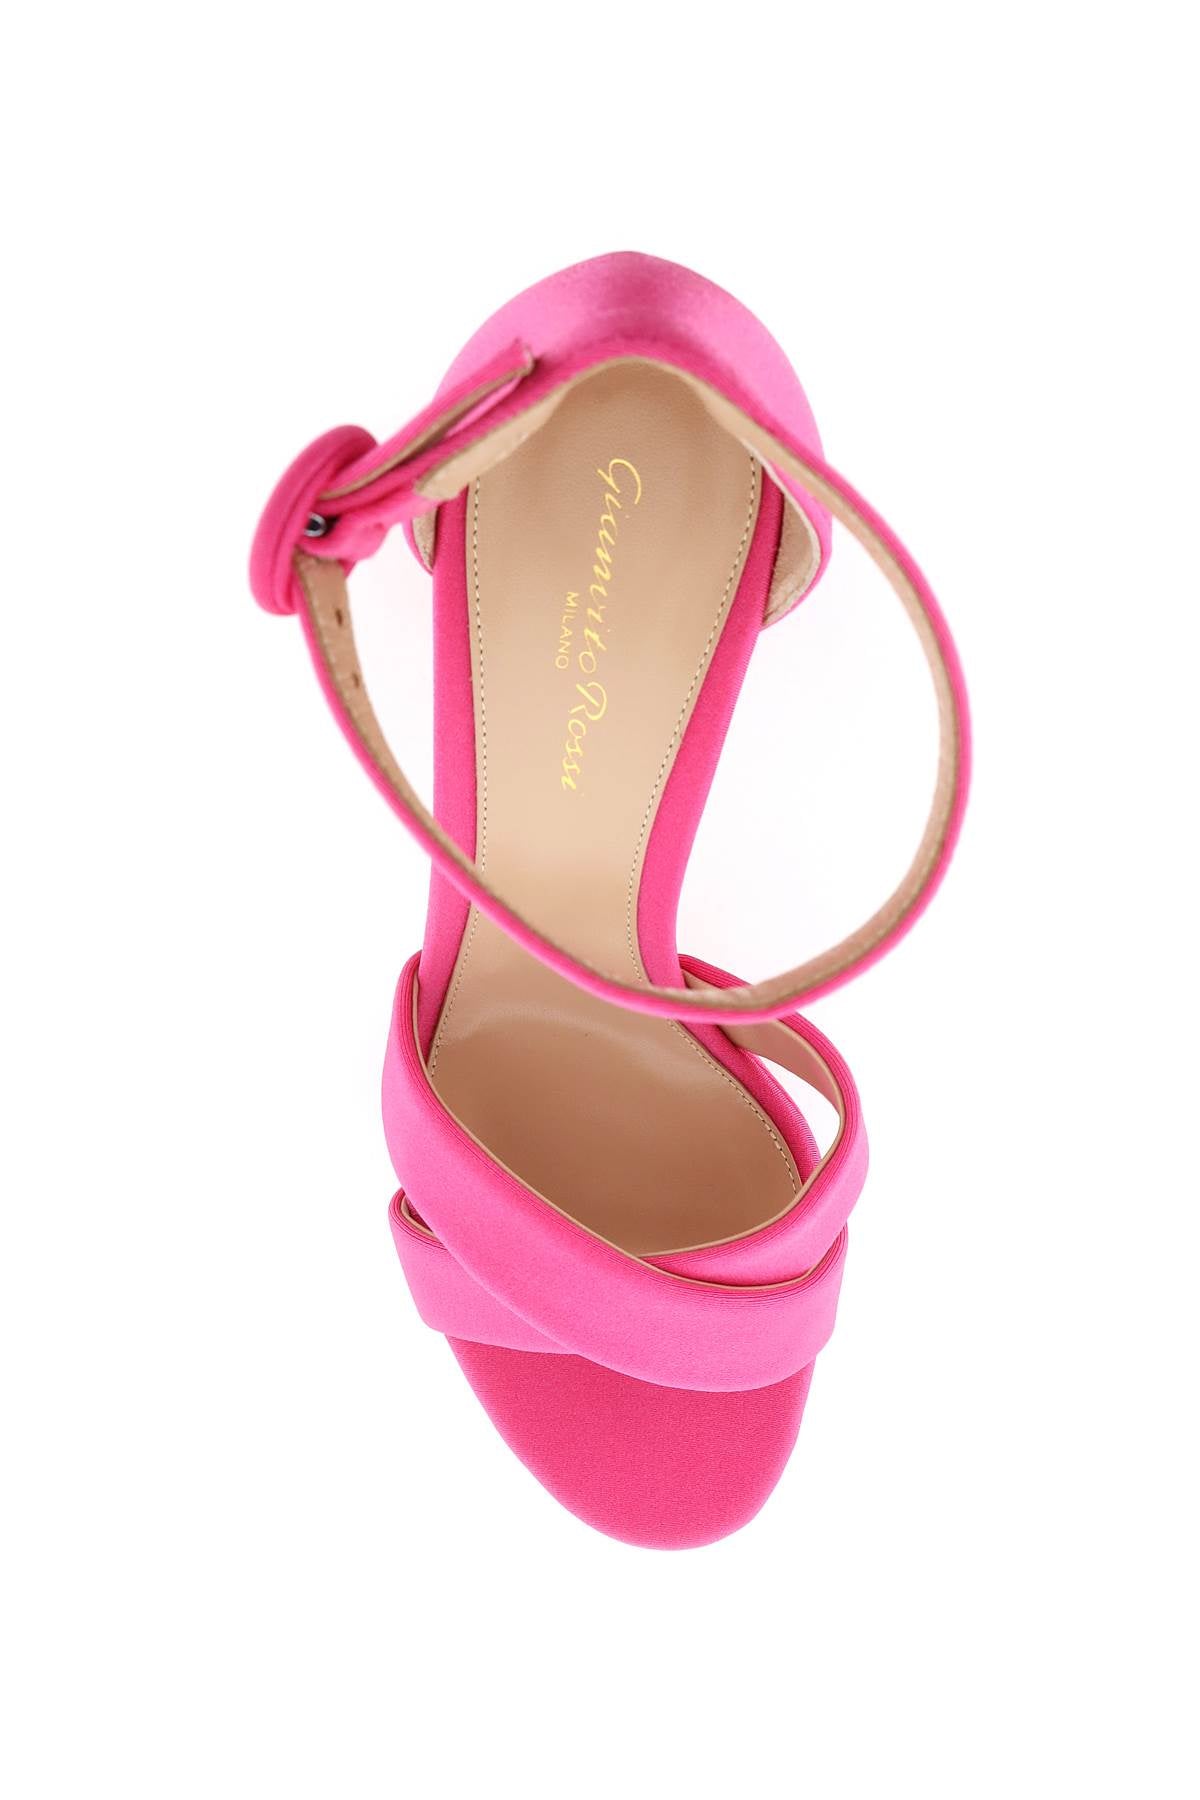 GIANVITO ROSSI Fuchsia Fabric Crossed Band Sandals with Adjustable Ankle Strap and High Heel